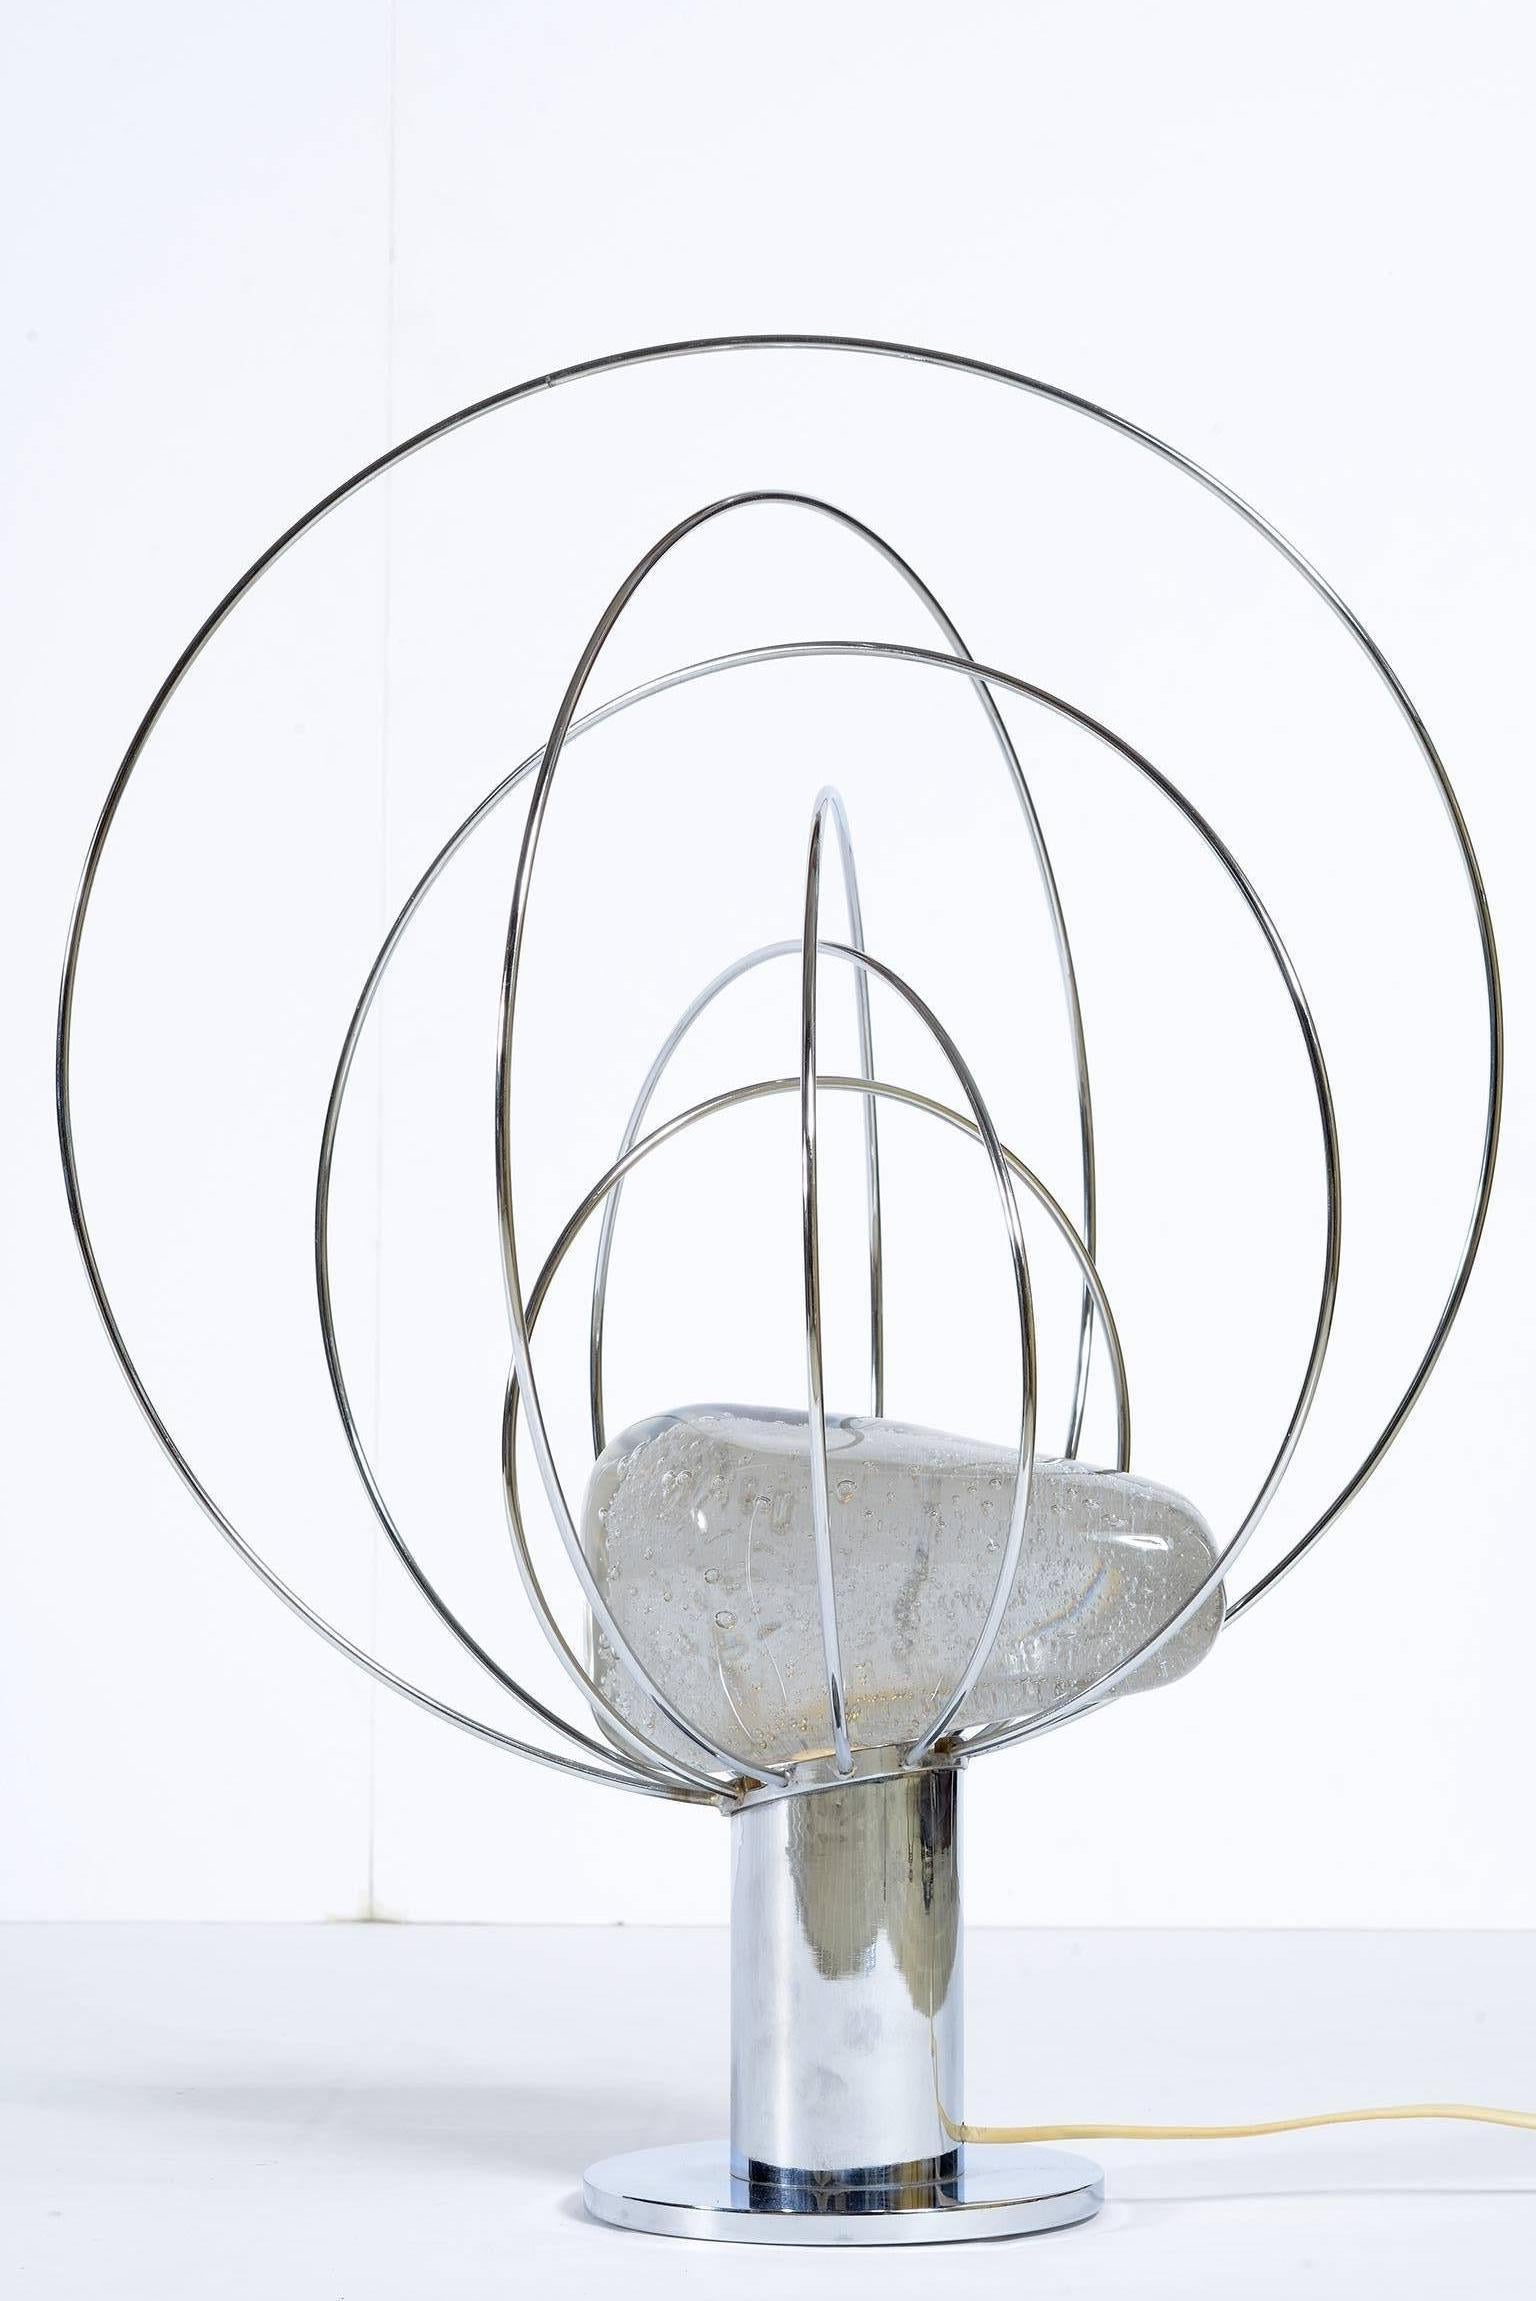 Metal chromed structure with a bulb inside to light a Murano glass with buble air inside .
This lamp was designe by Angelo Brotto for Esperia -Poggibonsi -Siena in the space age mid century .
Italy 1960's.